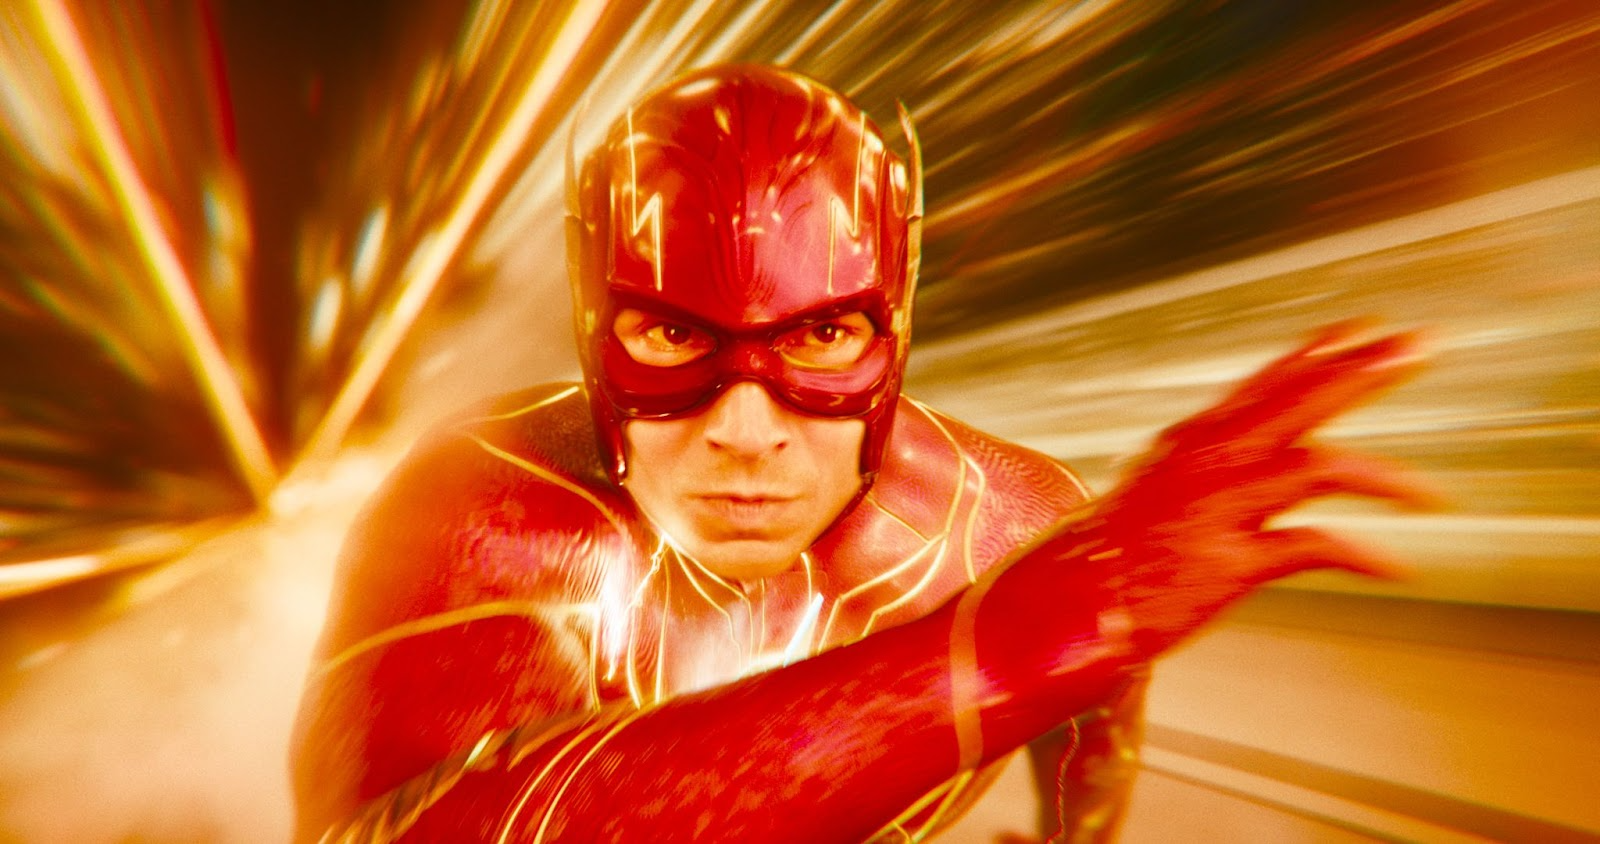 Catch Sneak Previews of “THE FLASH” in Select Cinemas Nationwide on June 13